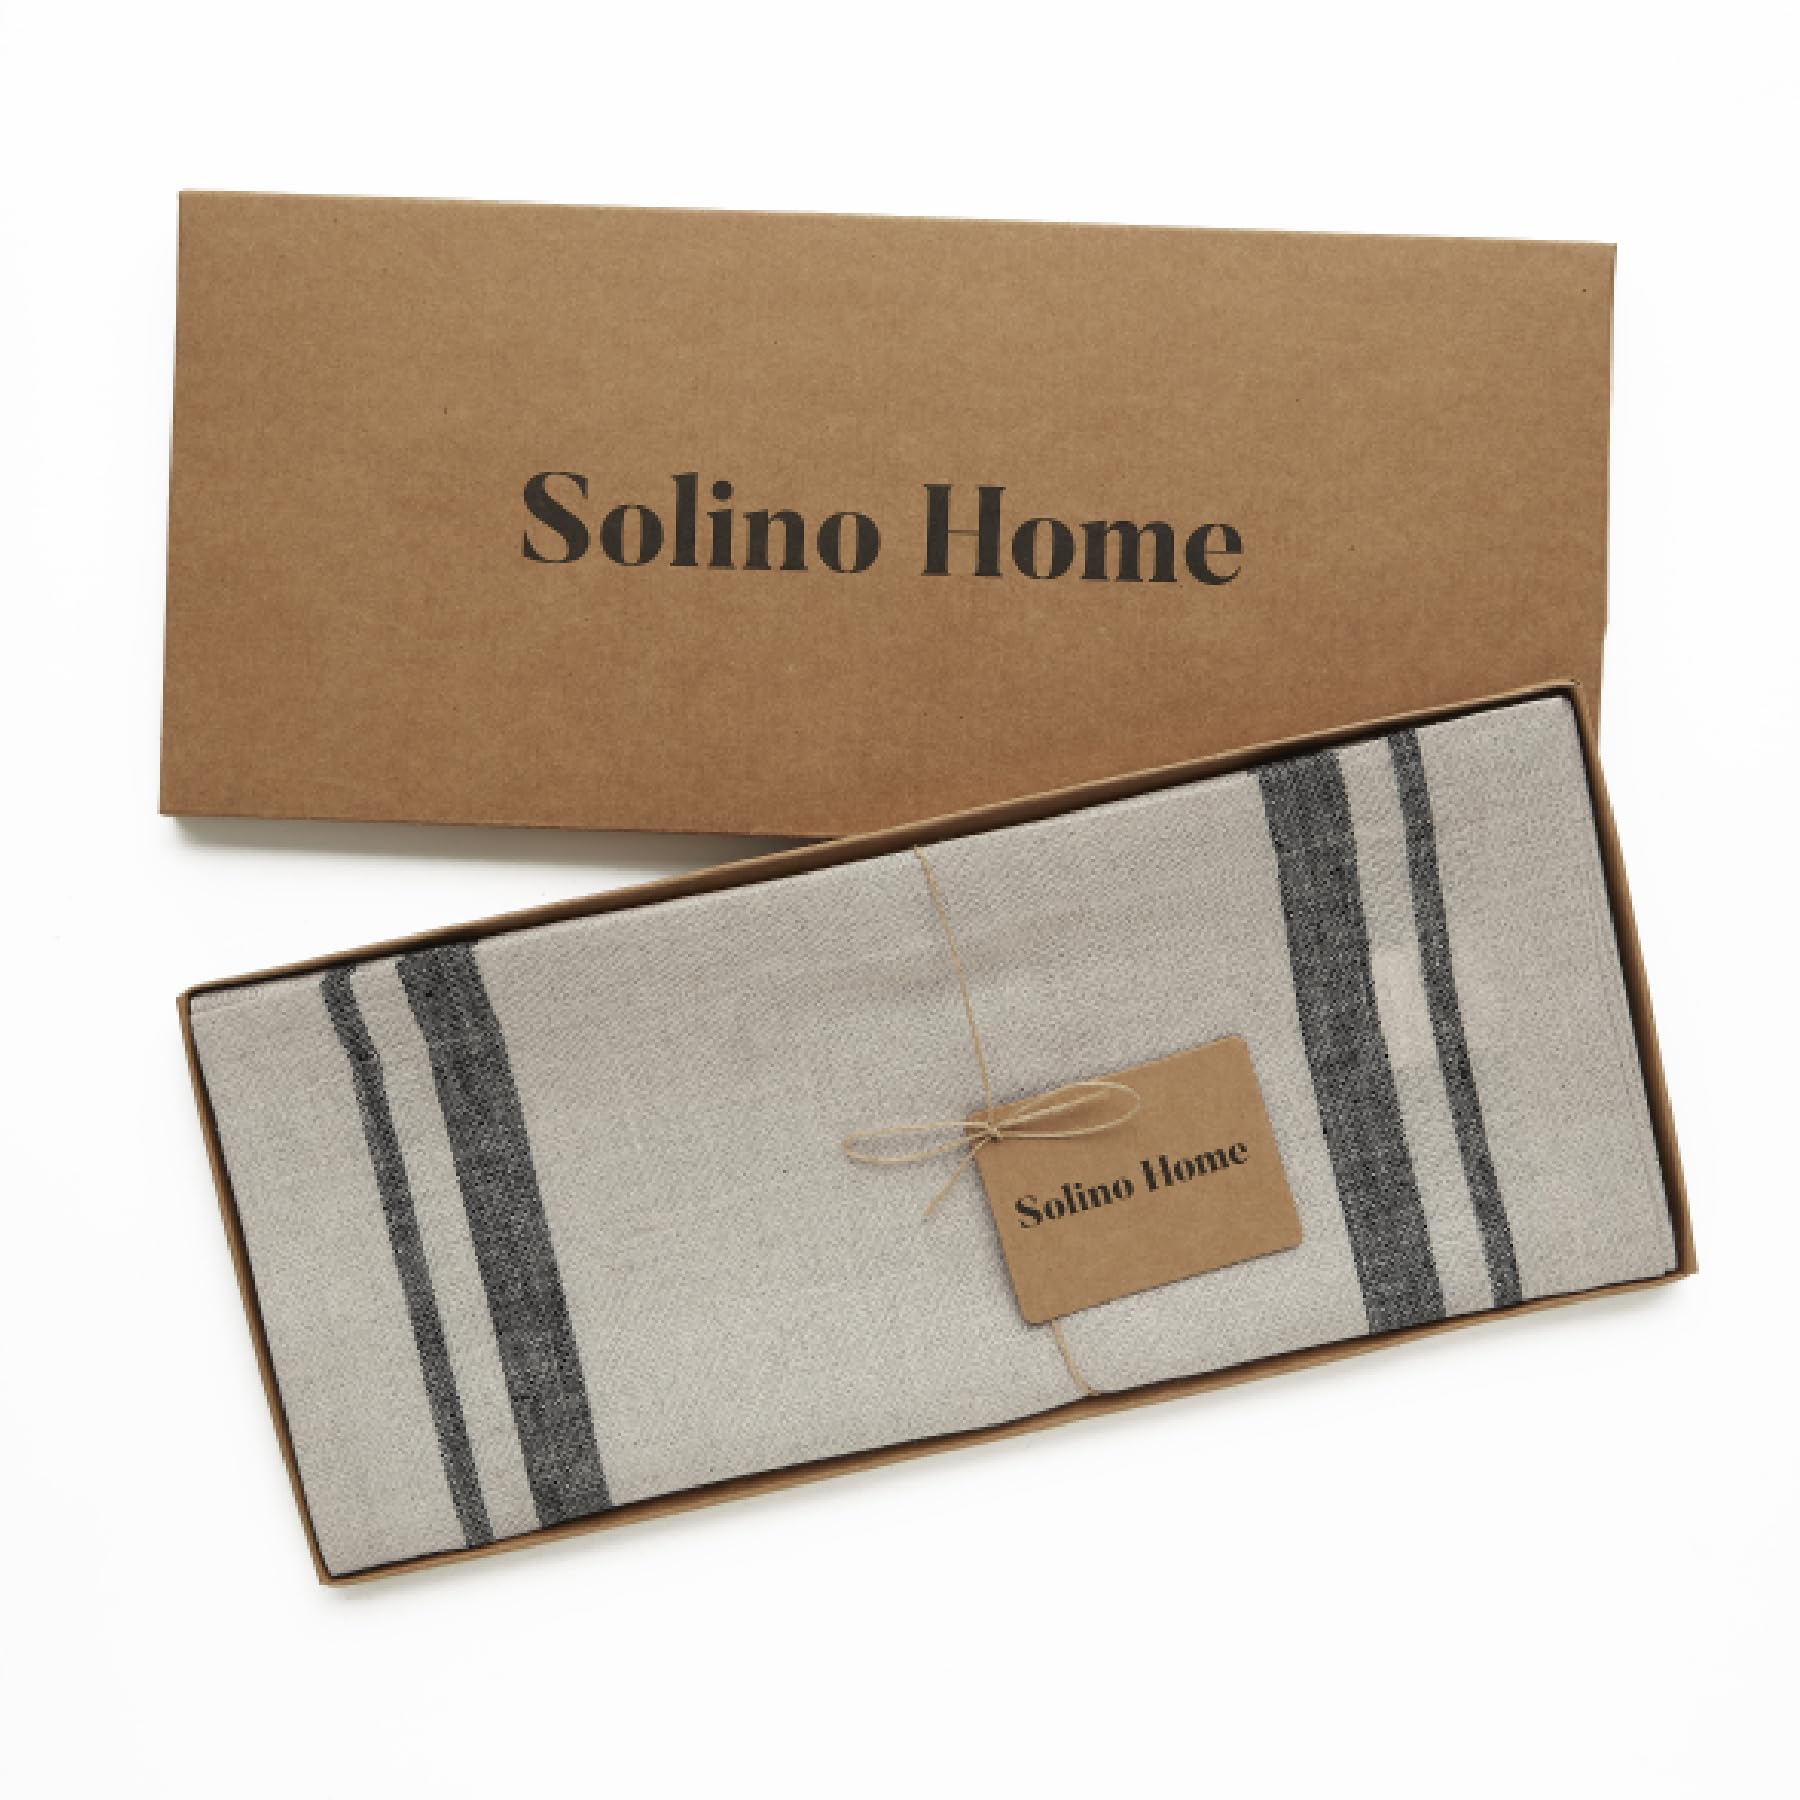 Solino Home French Stripe Linen Table Runner 36 inches – 100% Pure Linen 14 x 36 Inch Table Runner, Black and Natural – Small Coffee Farmhouse Table Runner for Indoor, Outdoor